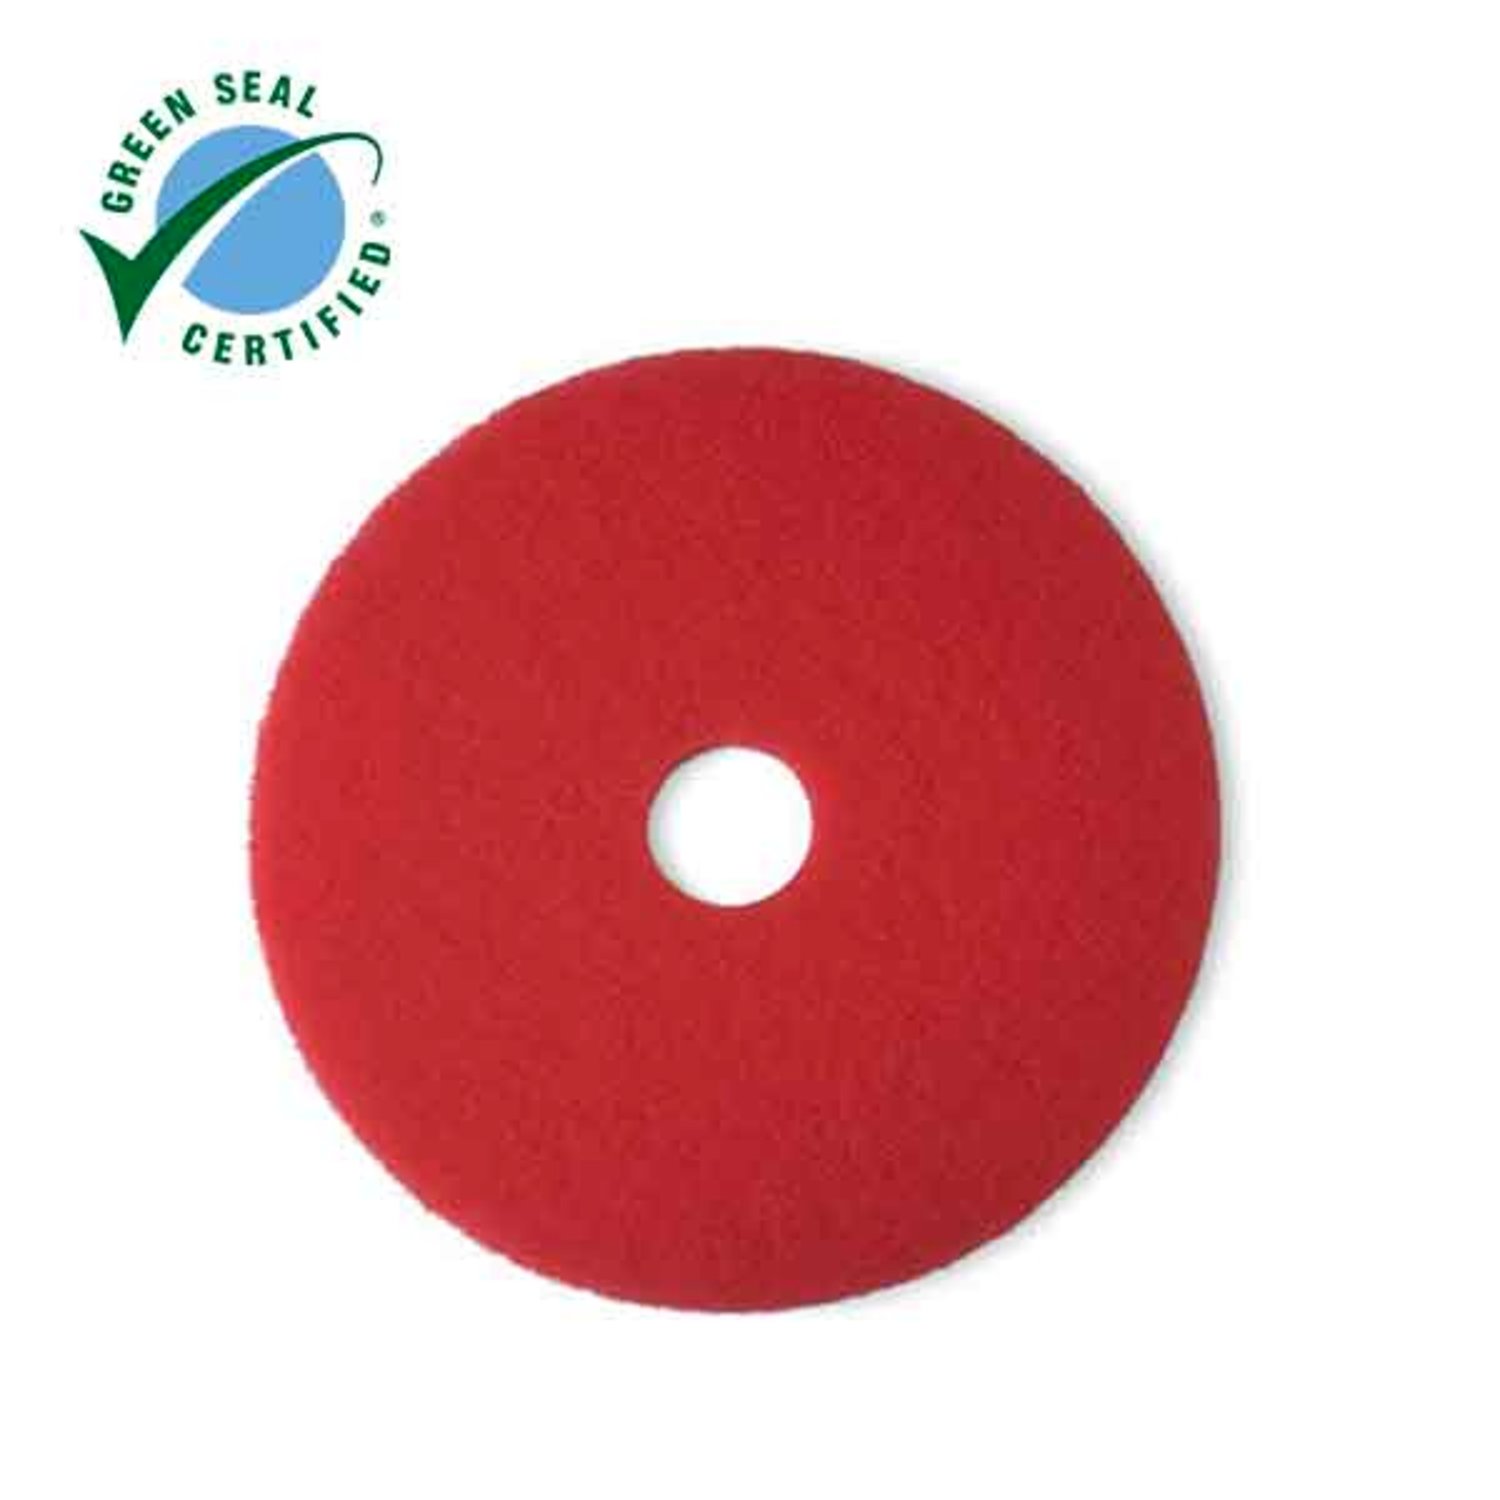 7000000680 - 3M Red Buffer Pad 5100, Red, 406 mm x 82 mm, 16 in, 5 ea/Case